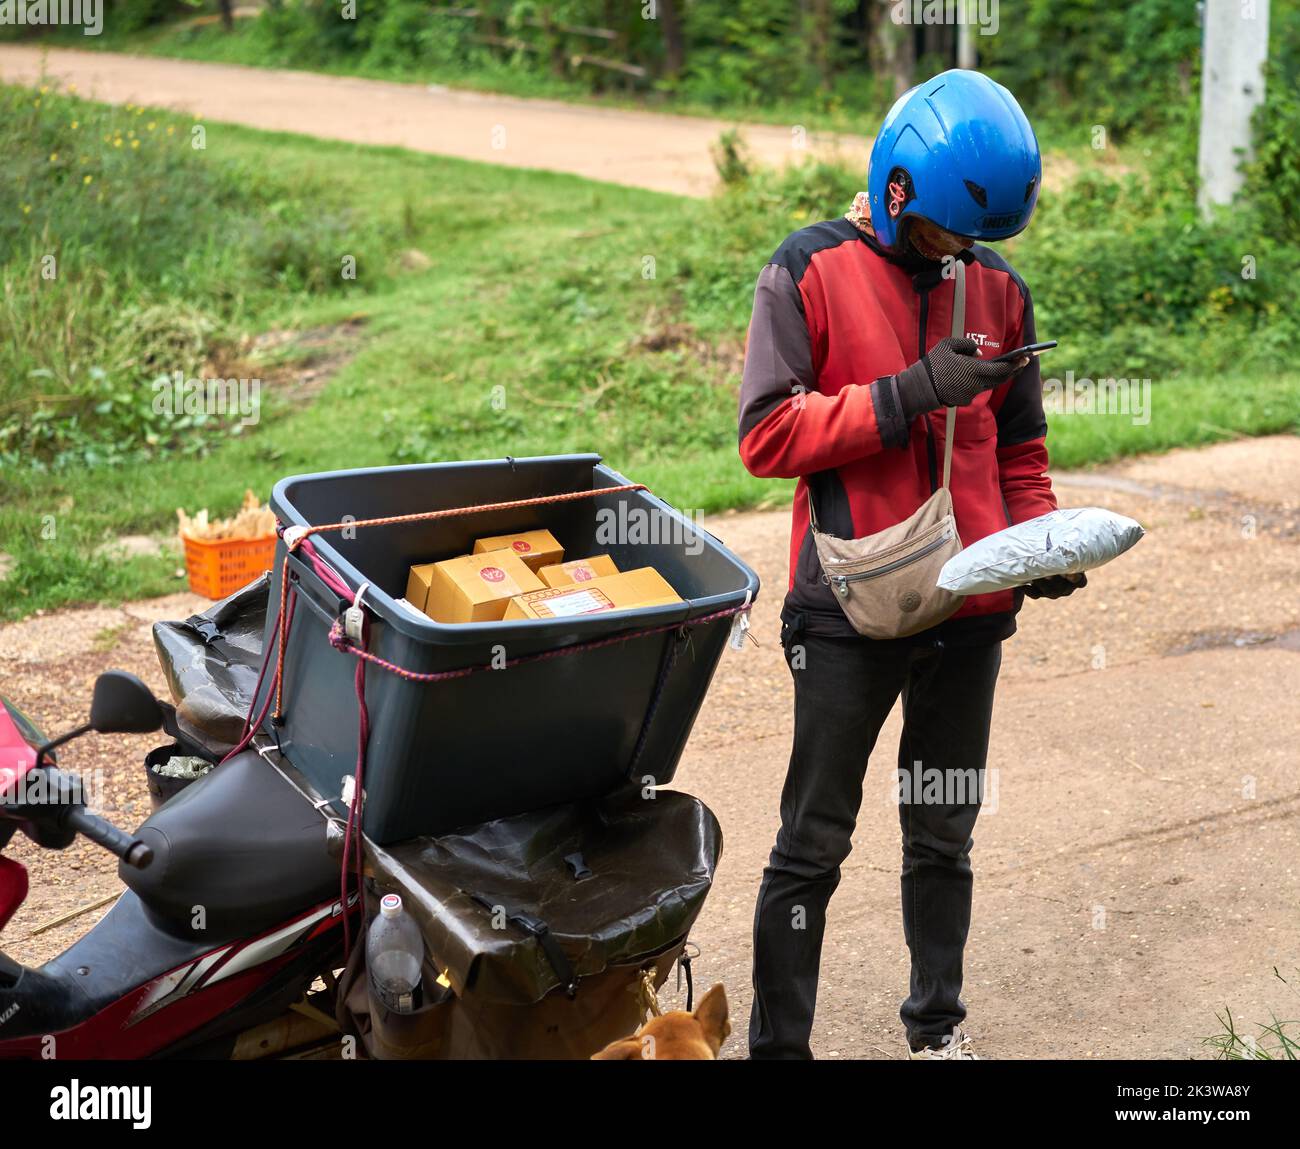 A motorcycle courier delivers packages in a rural area. Stock Photo